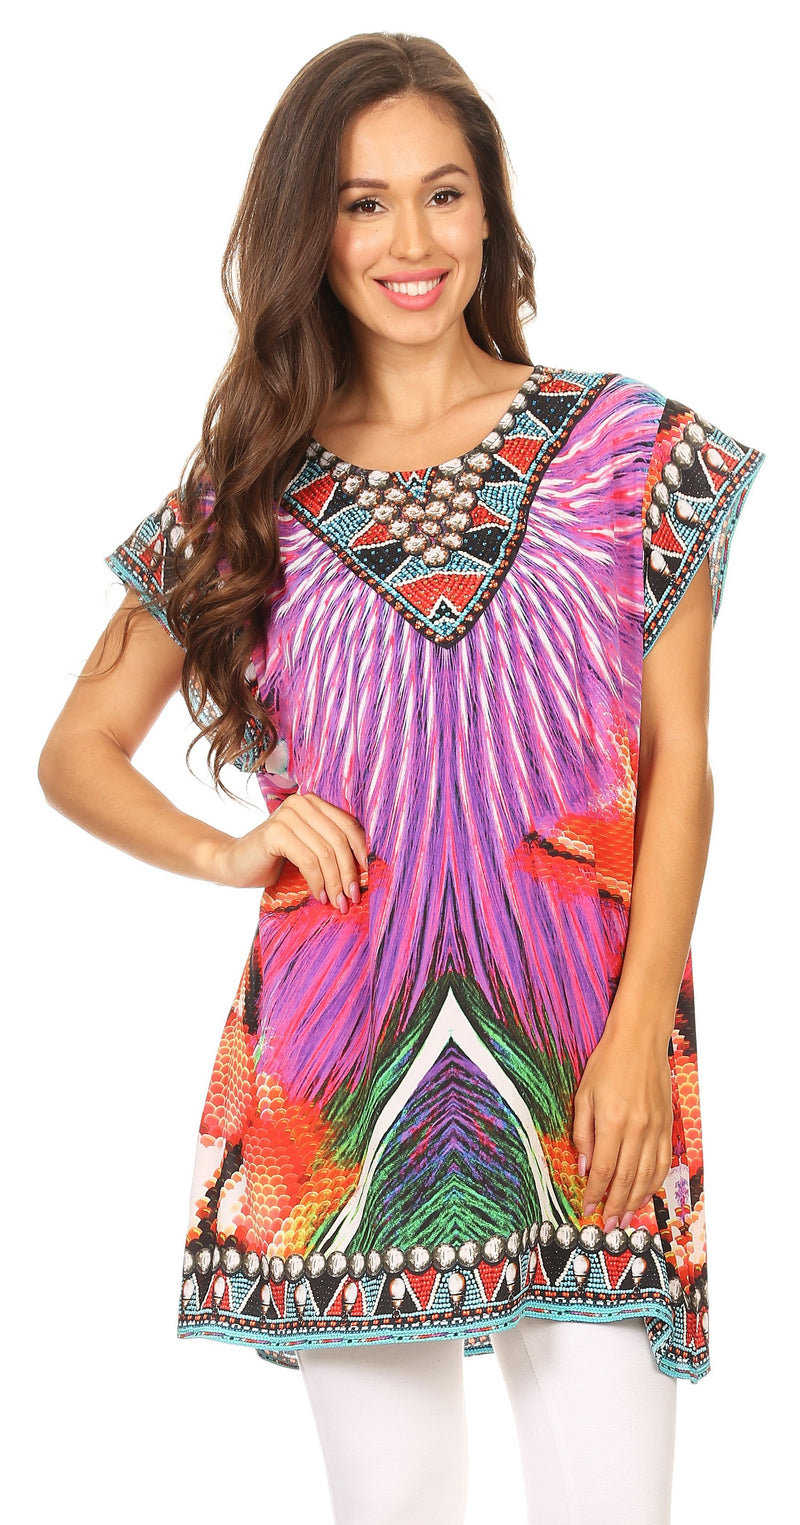 Sakkas Lesedi Top Blouse With Cap Sleeves Colorful Print and Rhinestones